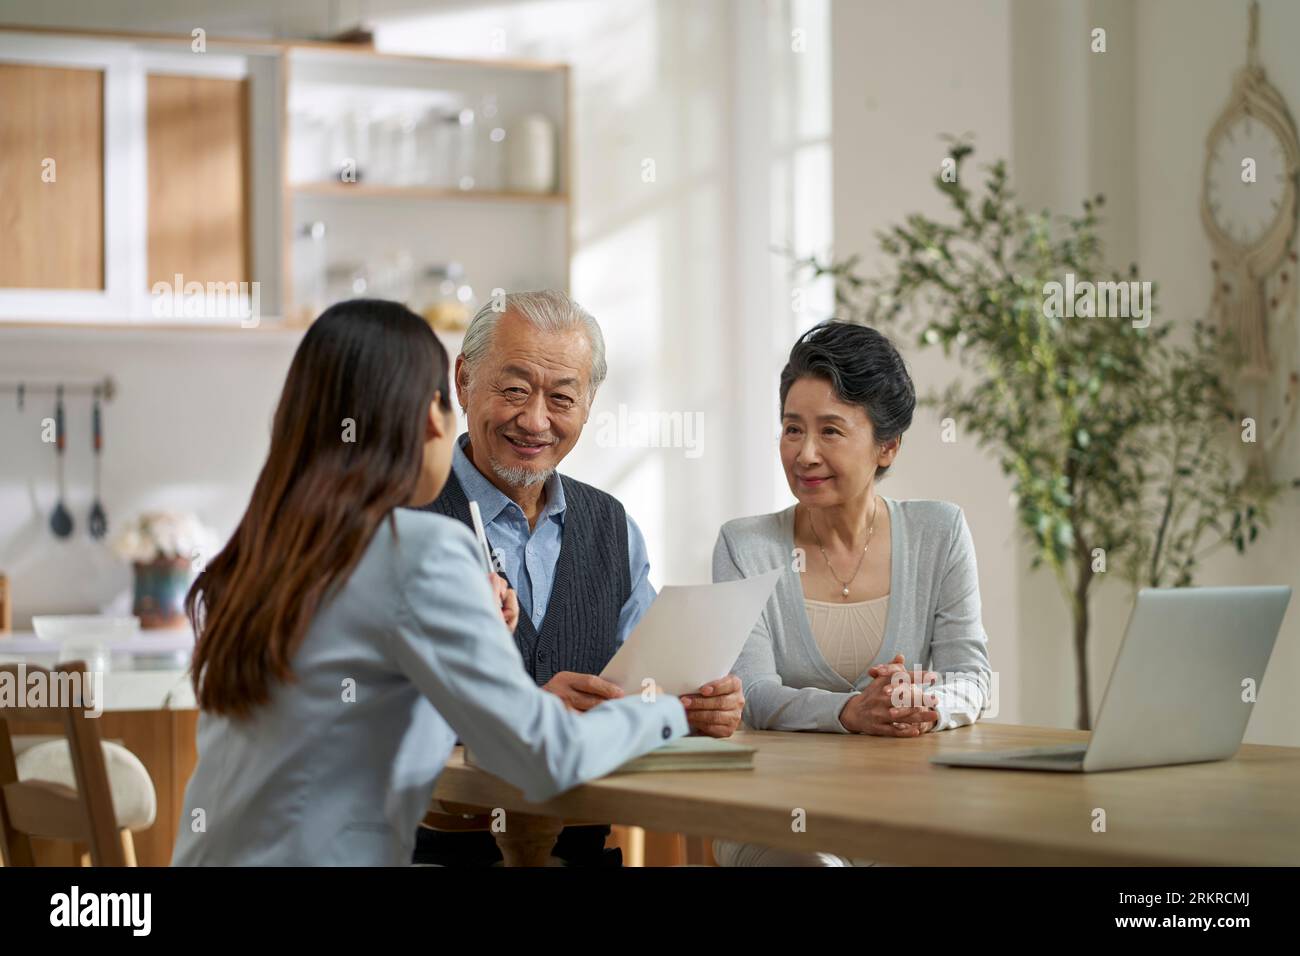 young asian door to door saleswoman selling product or service to a senior couple Stock Photo